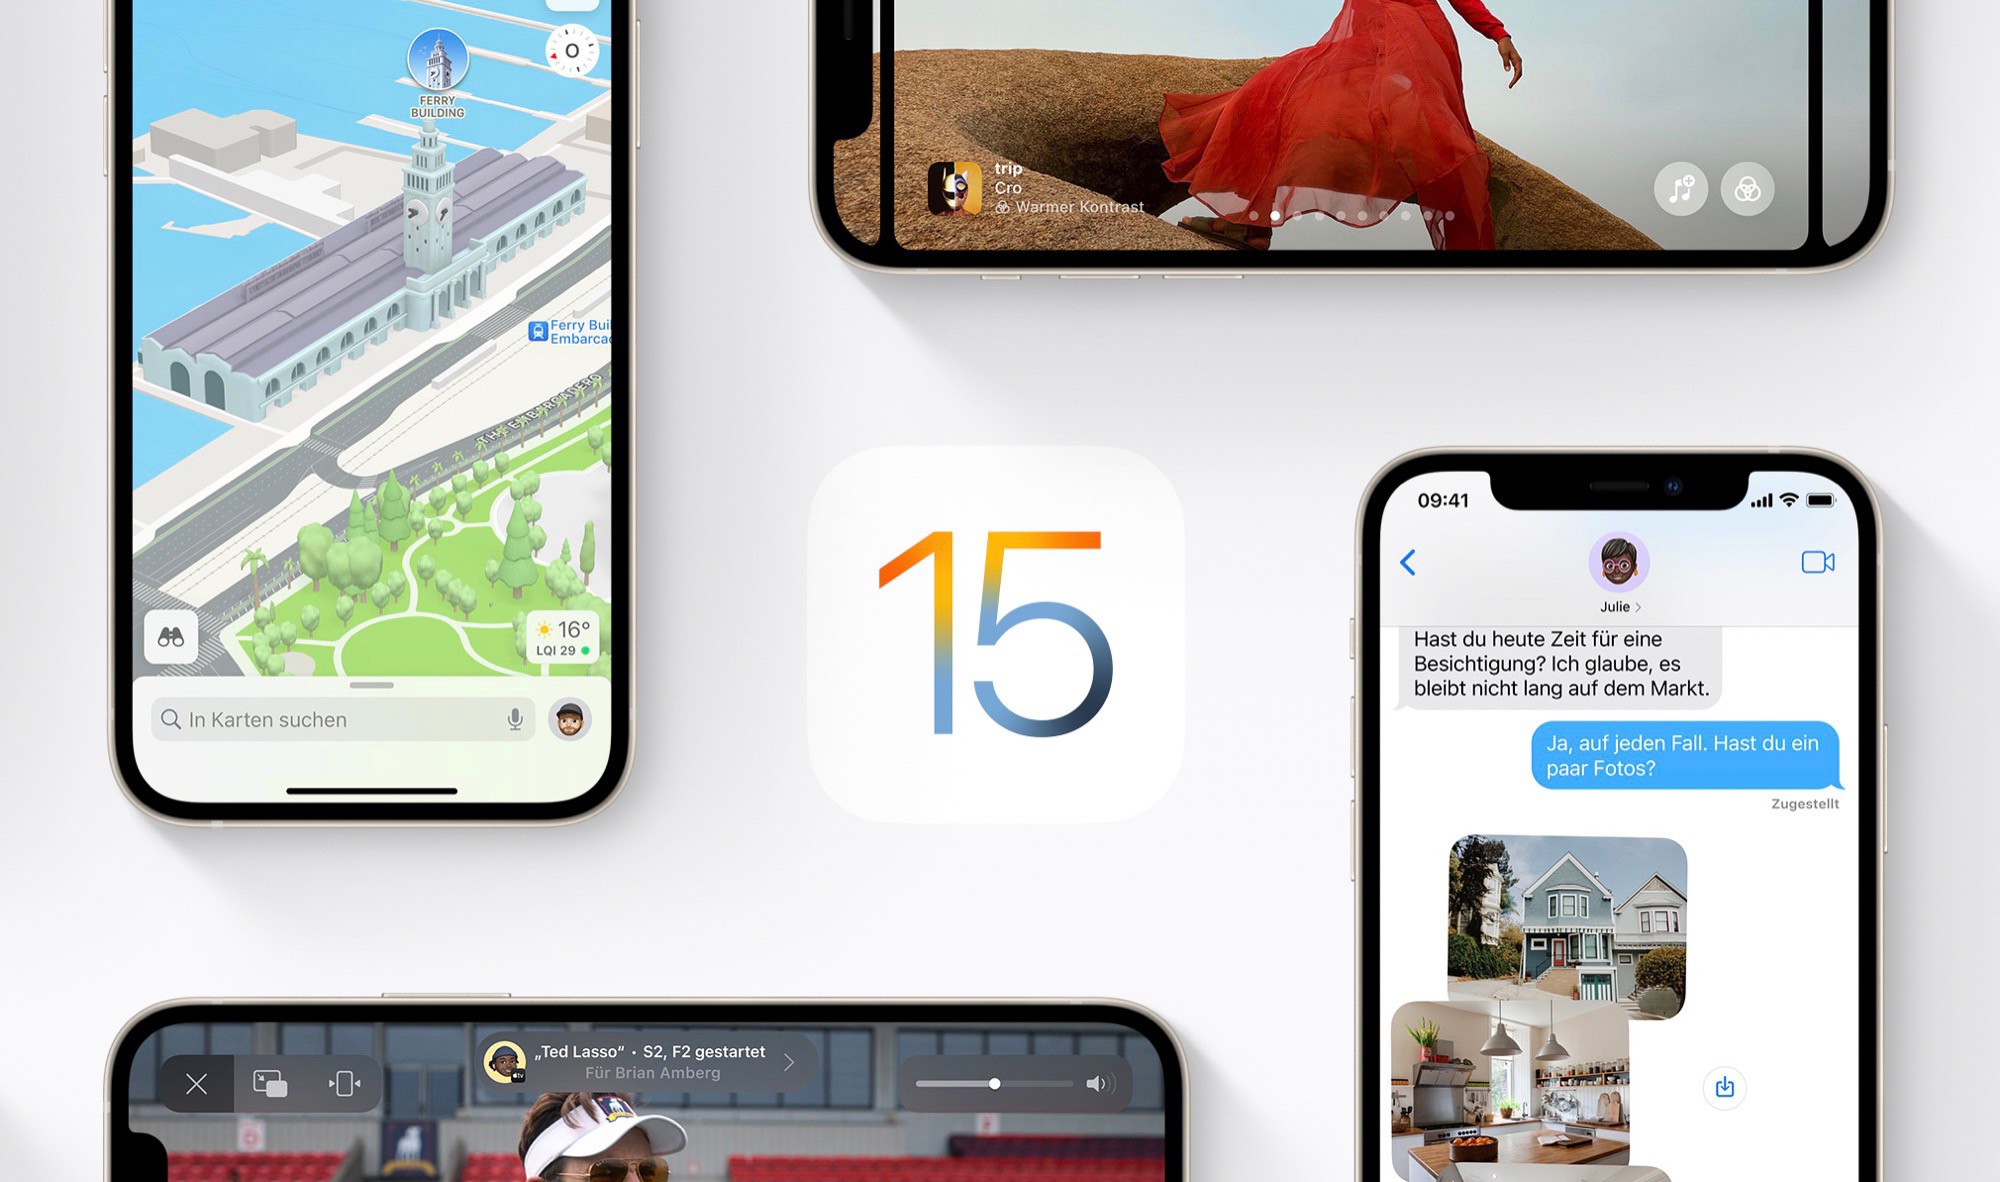 Ios 15.4 face id with mask iphone 11